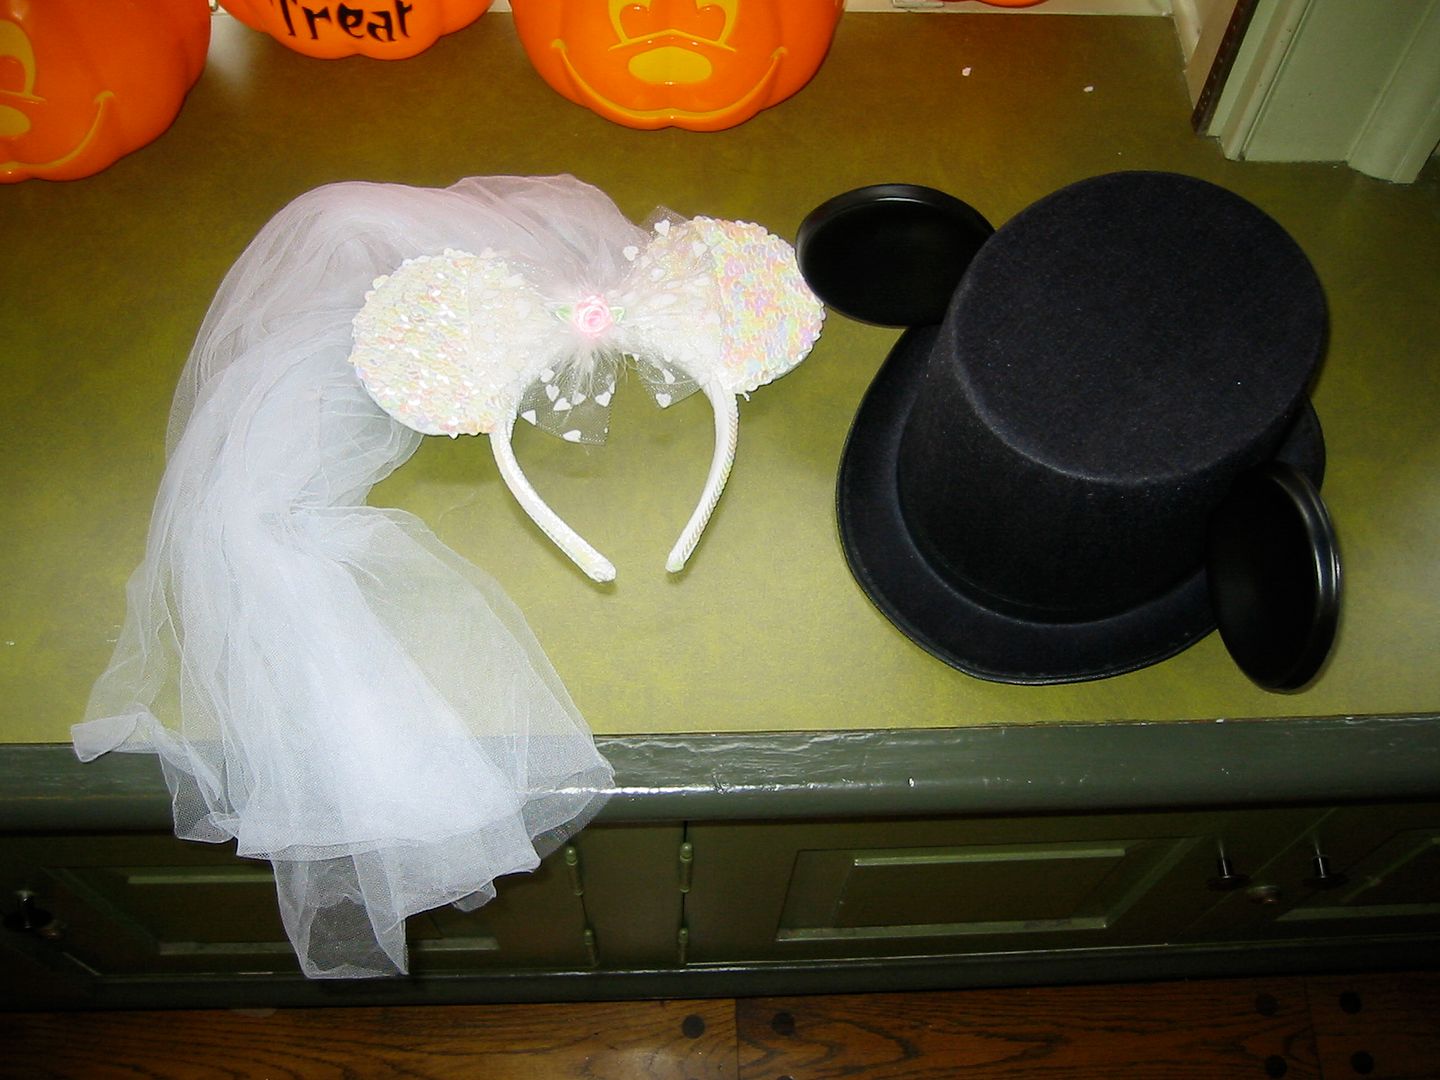 How much are the bridal mouse ears and how many different